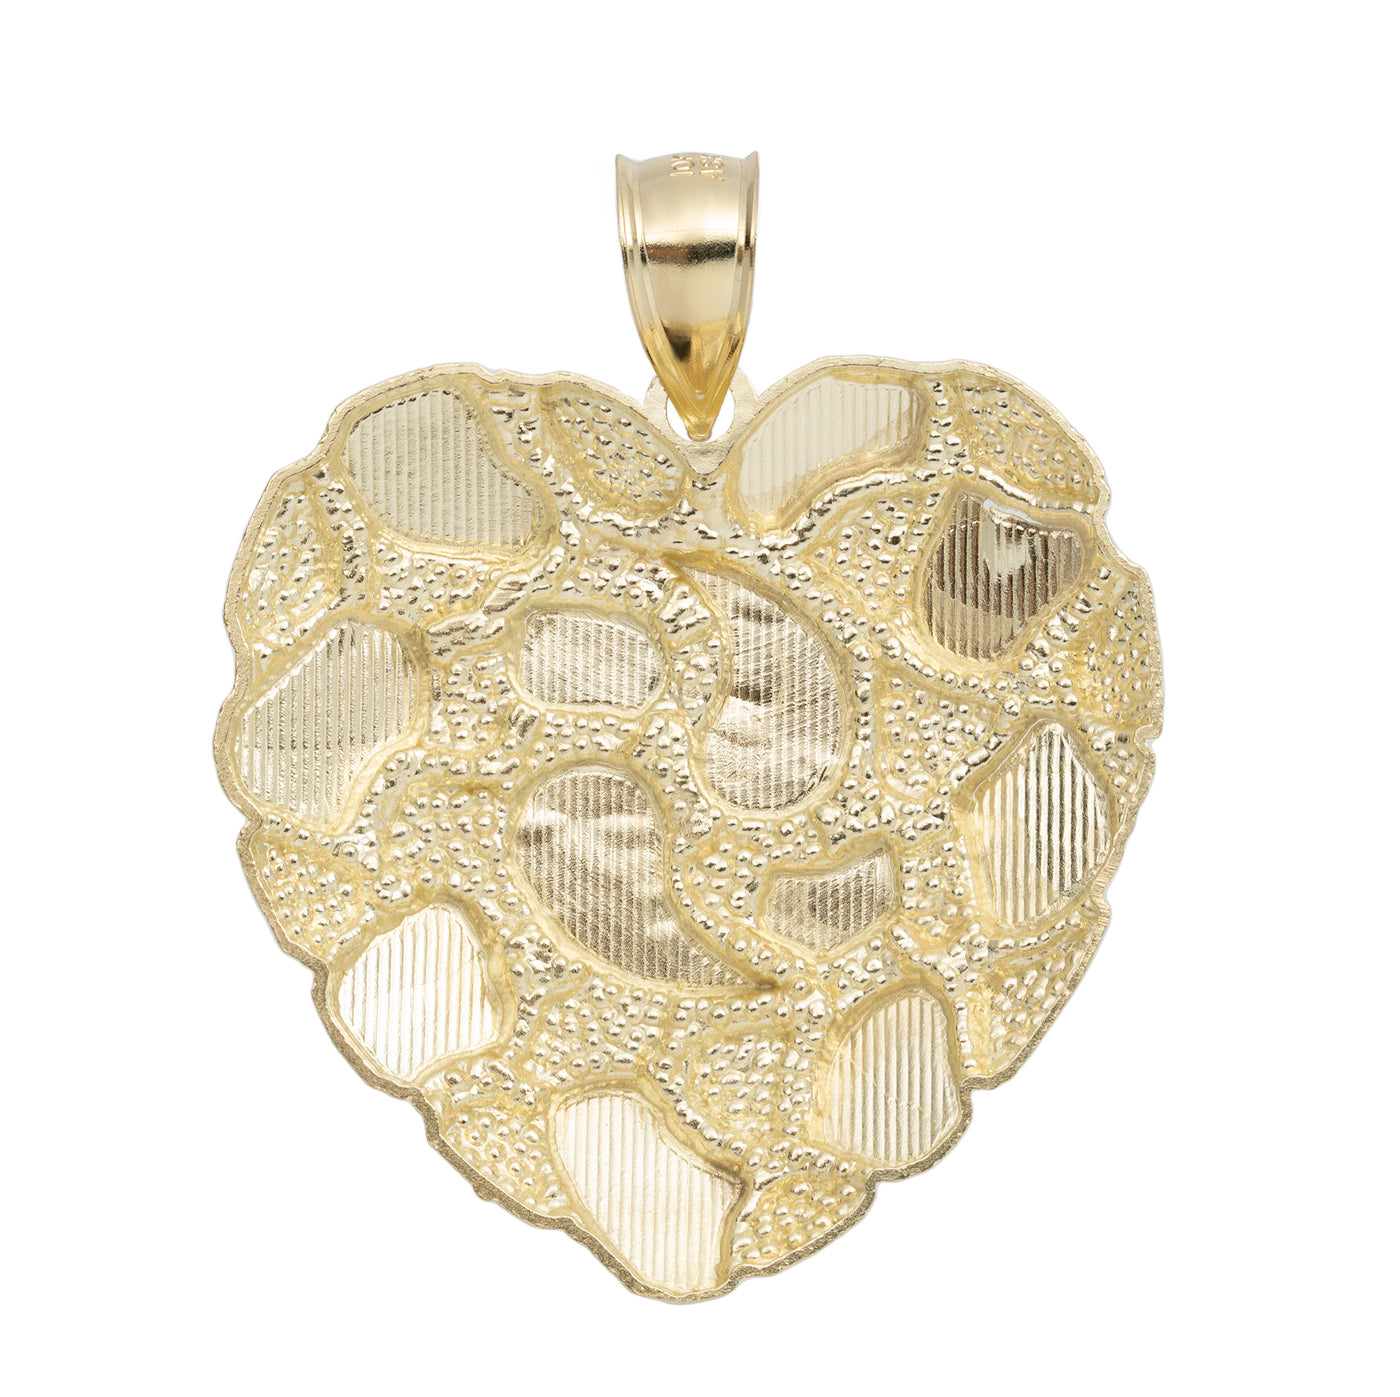 Nugget Heart Shaped Pendant Charm 10K Yellow Gold